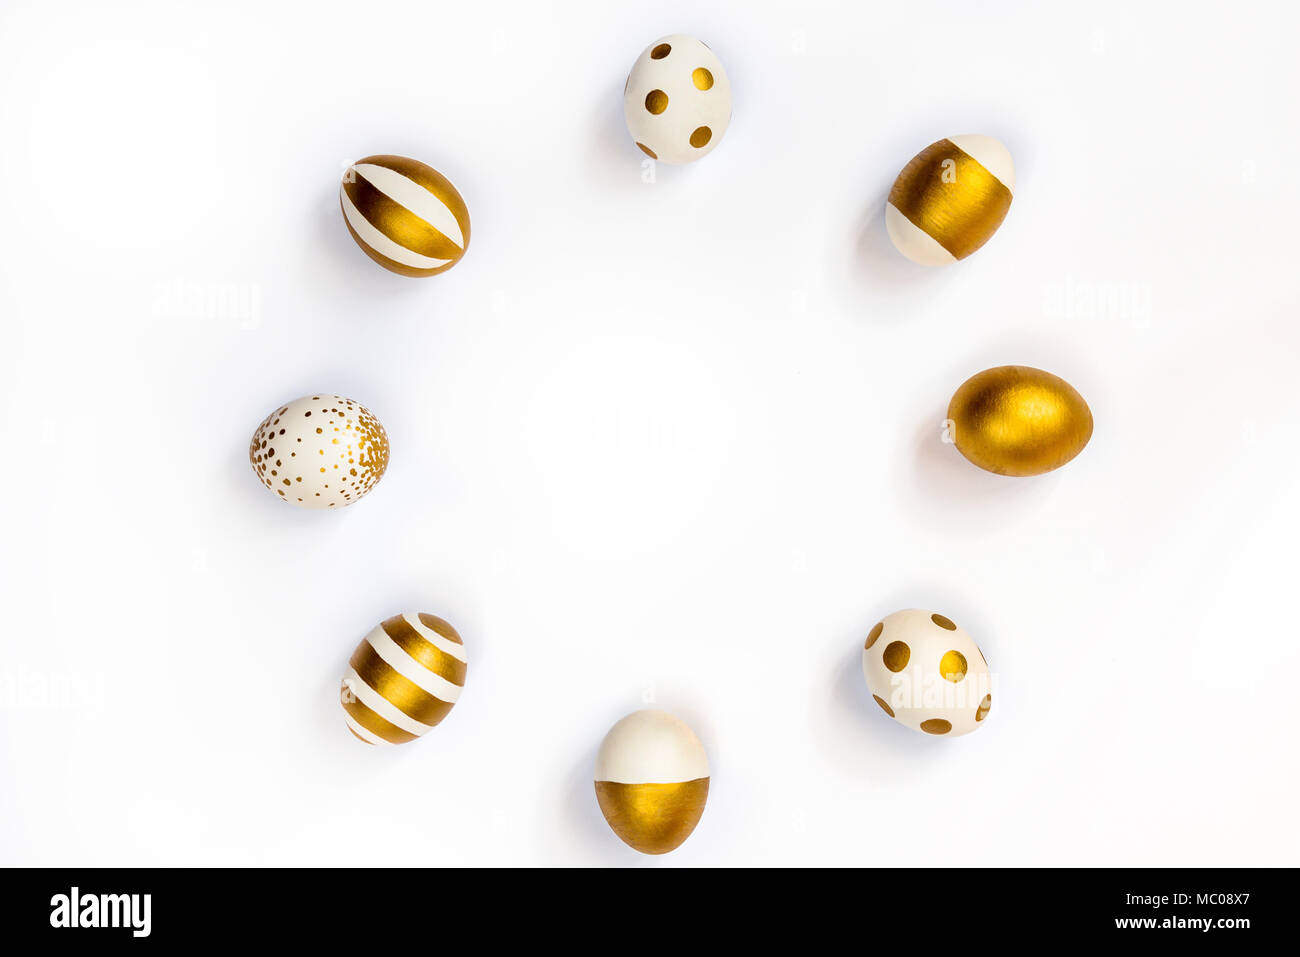 Top view of easter eggs colored with golden paint in differen patterns arranged in circle. Various striped and dotted designs. White background. Copy  Stock Photo